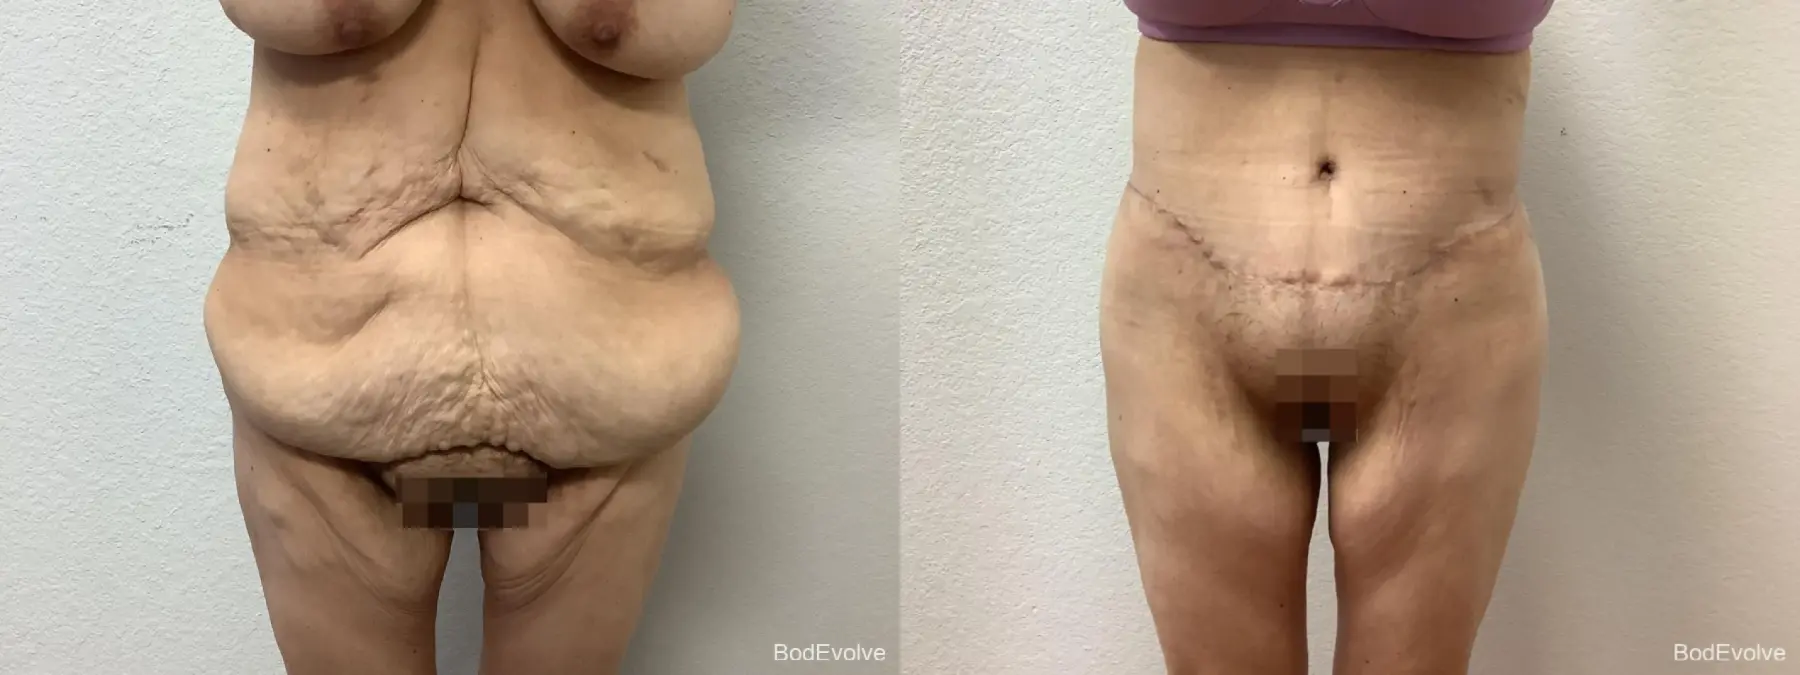 After Massive Weight Loss: Patient 4 - Before and After 1